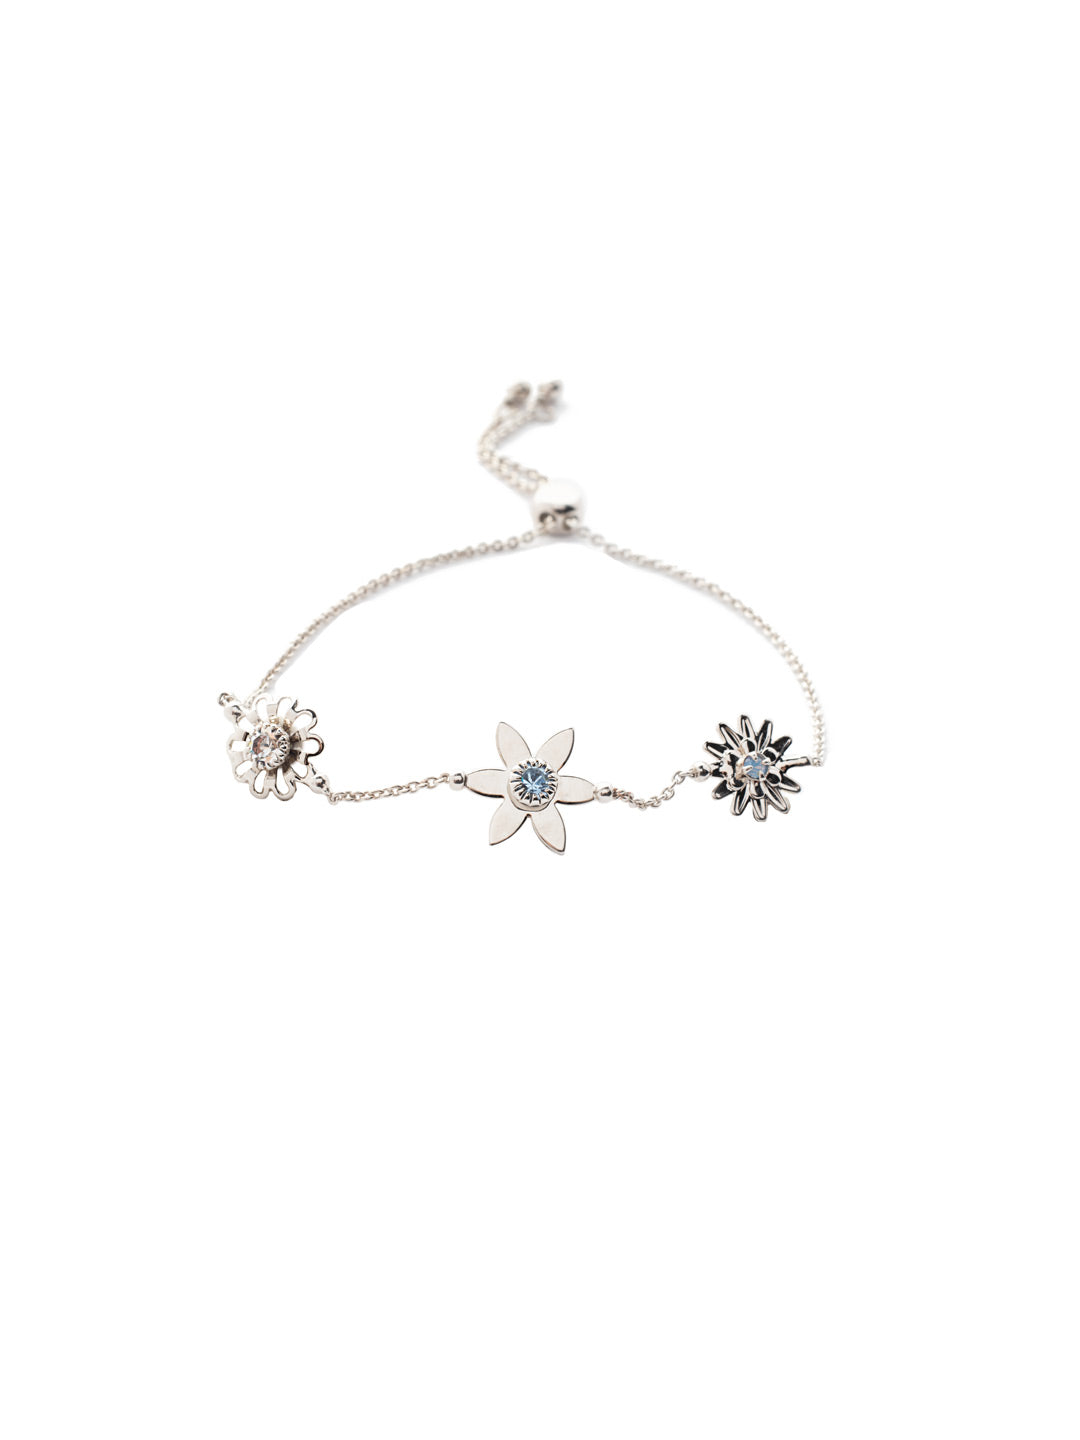 Normani Slider Bracelet - BEV1PDWNB - <p>The Normani Slider Bracelet celebrates spring with floral charm accents and crystals that shine bright. Slide it on and fit to size. From Sorrelli's Windsor Blue collection in our Palladium finish.</p>